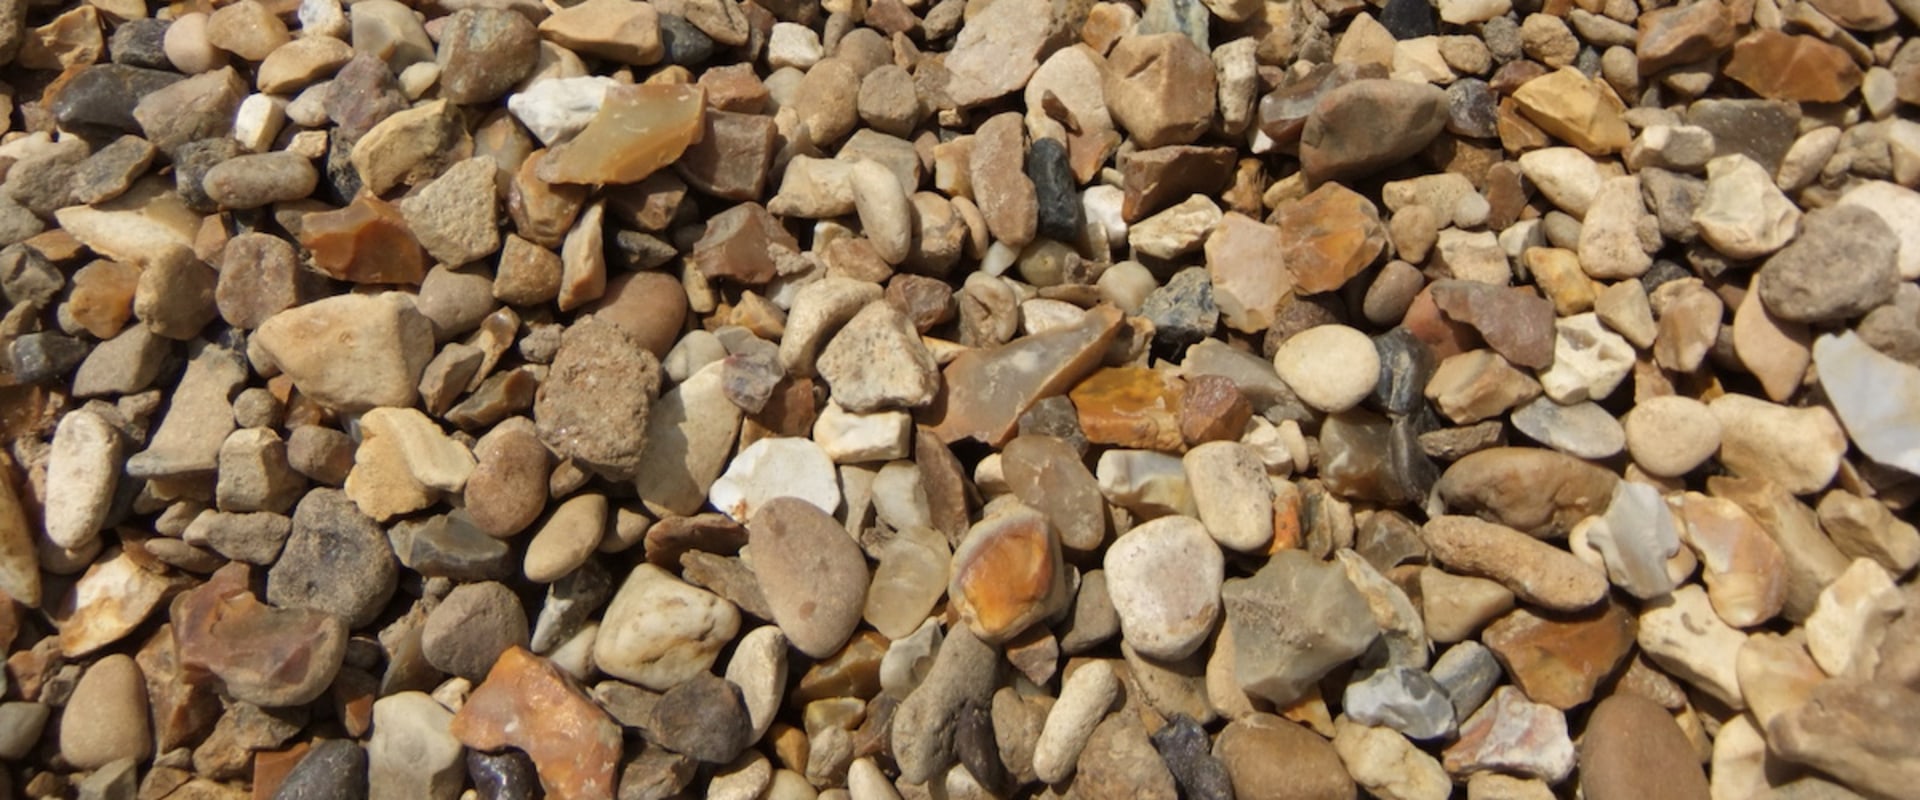 What Makes a Quality Aggregate?